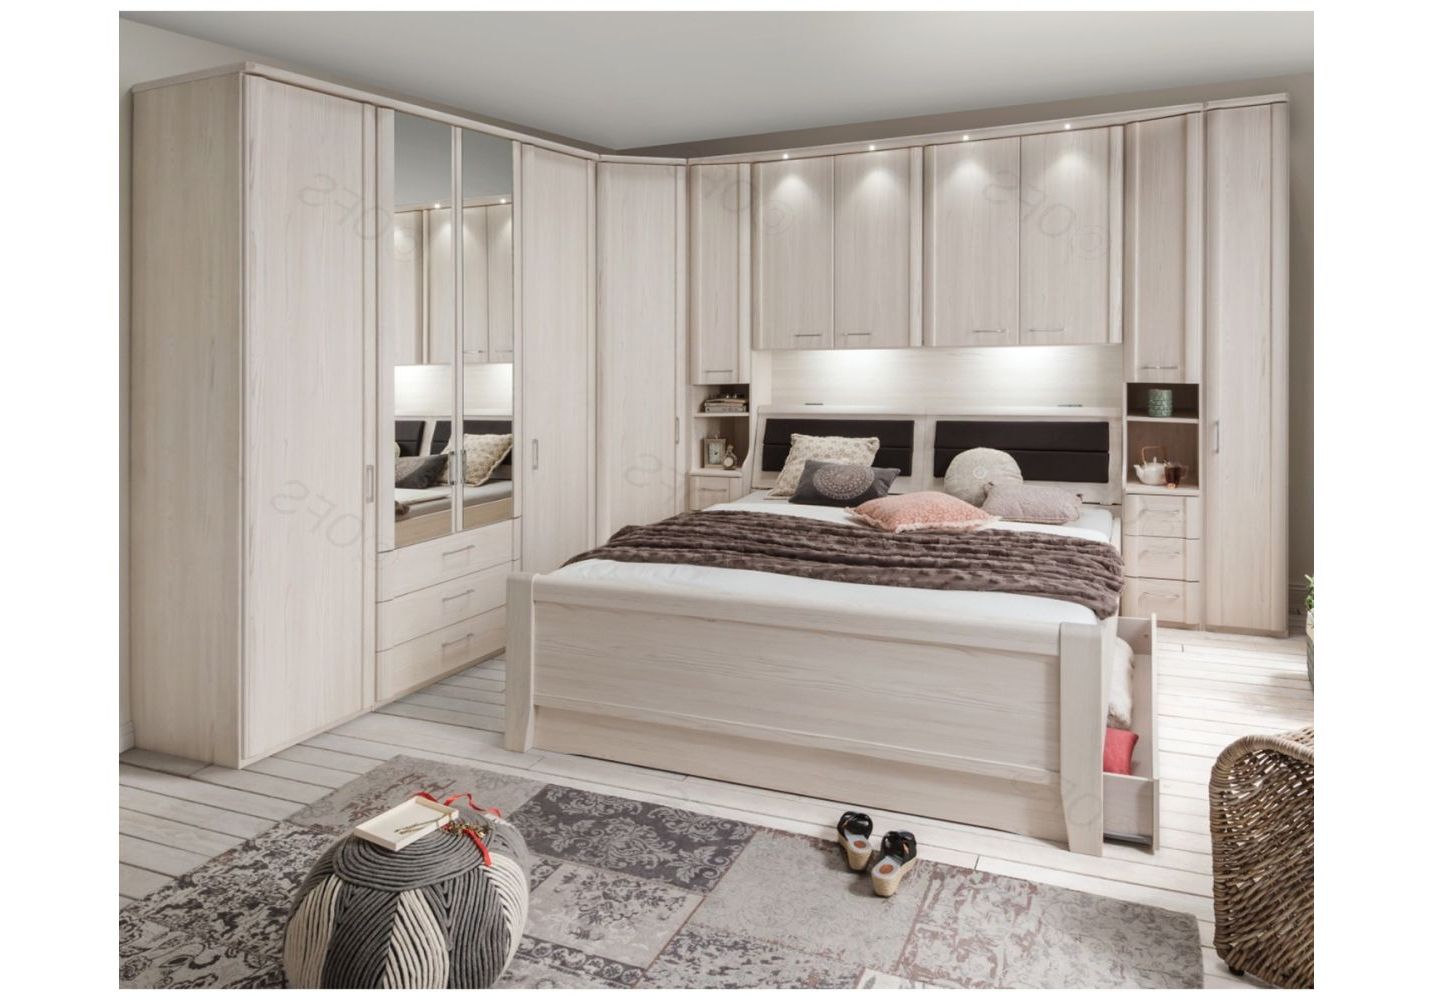 Wiemann Luxor4 | Luxor4 Wooden Overbed Unit Suggestion 1&2|  Onlinefurniturestore.co.uk With Overbed Wardrobes (Gallery 7 of 20)